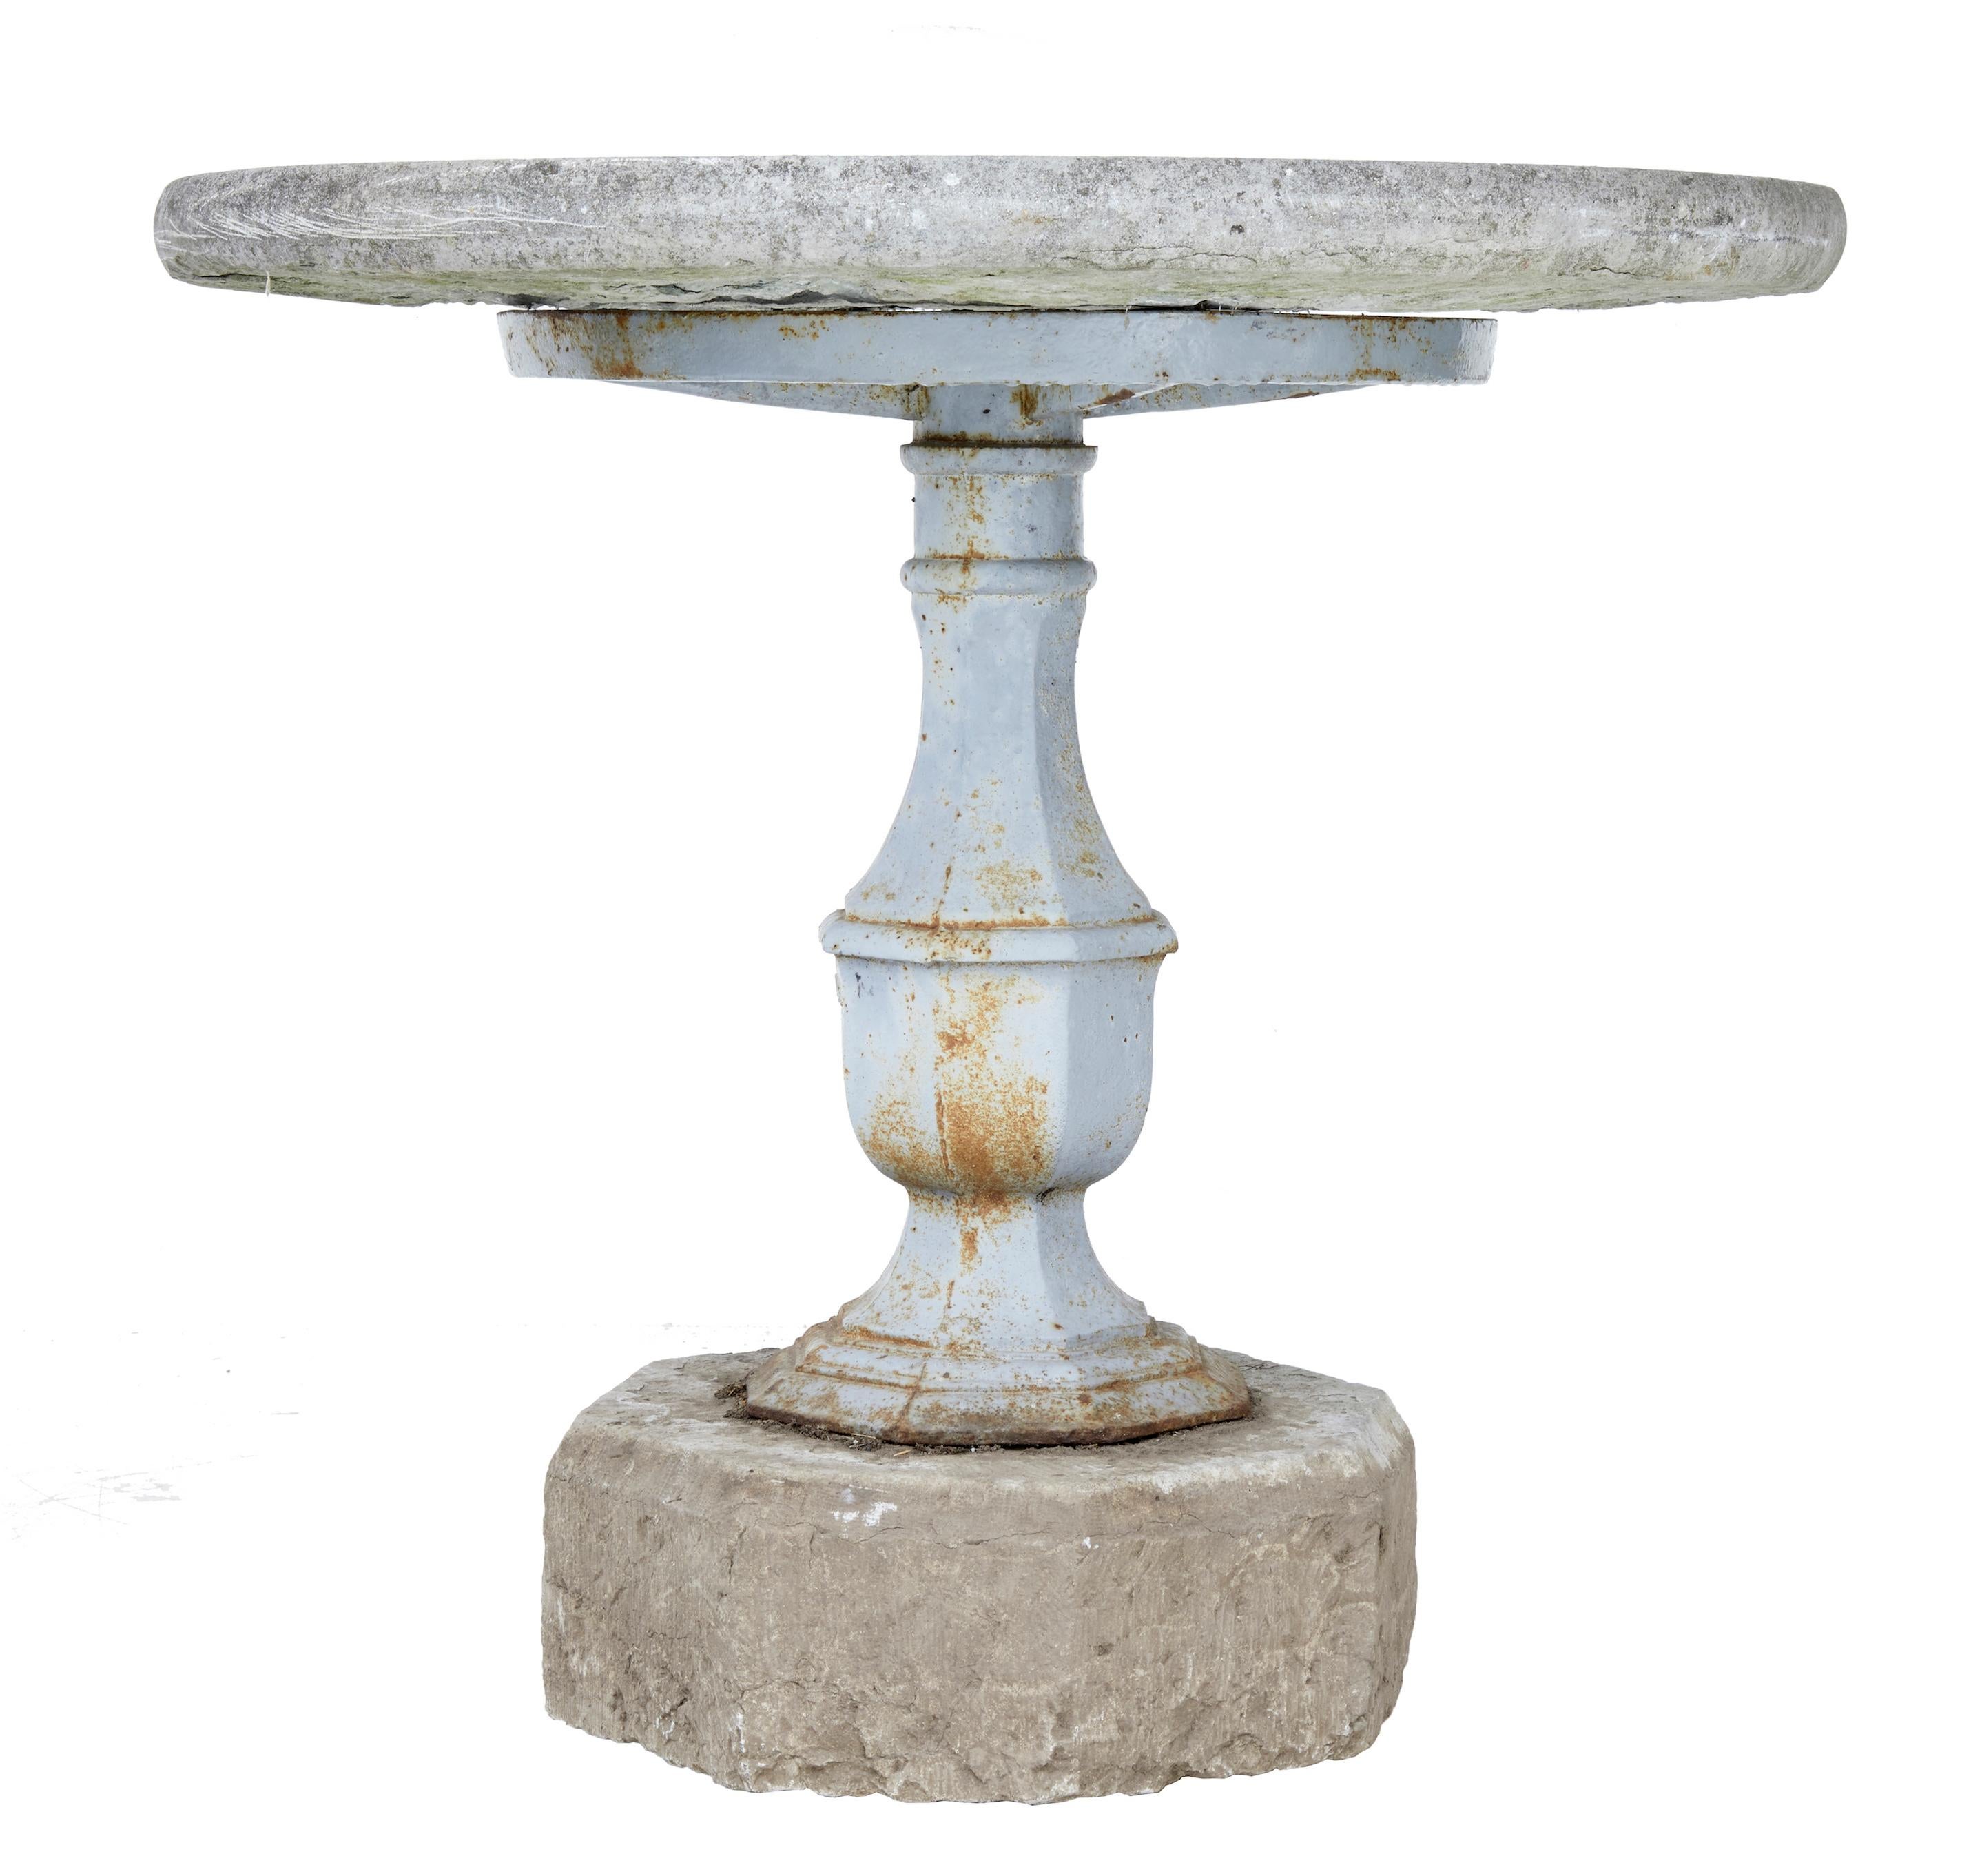 Rare 19th century Swedish stone and iron garden table circa 1860.

The manufacture of cannons at the Stavsjo Bruk is well known and that is where the base of this table was made. Taxinge castle is a stately home west of Stockholm. Round 2 1/4